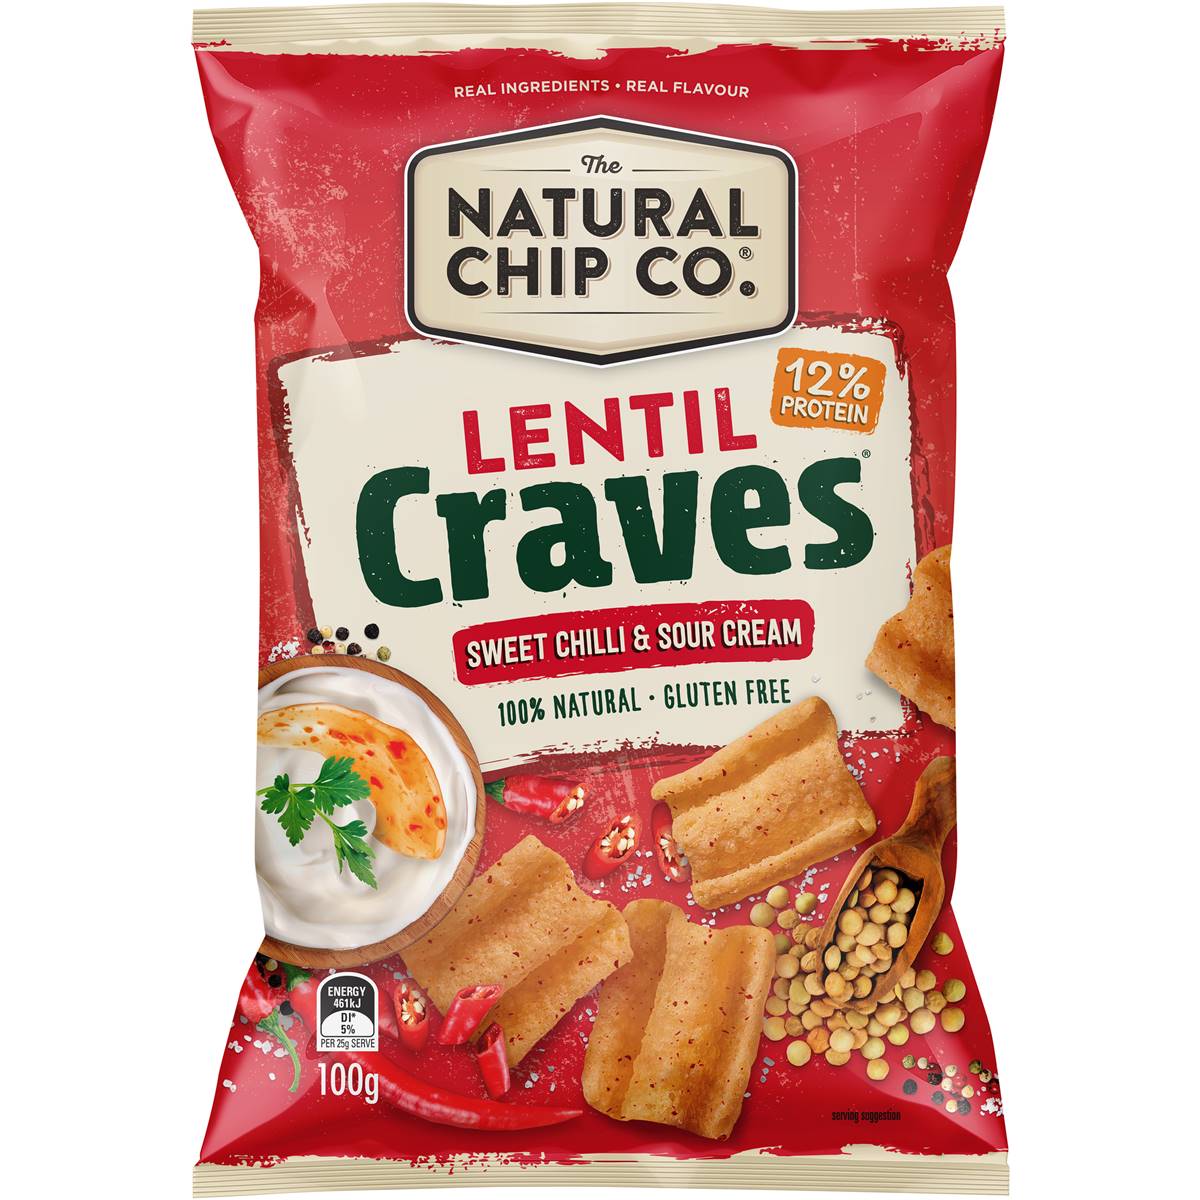 Calories in The Natural Chip Co. Lentil Craves Sweet Chili & Sour Cream